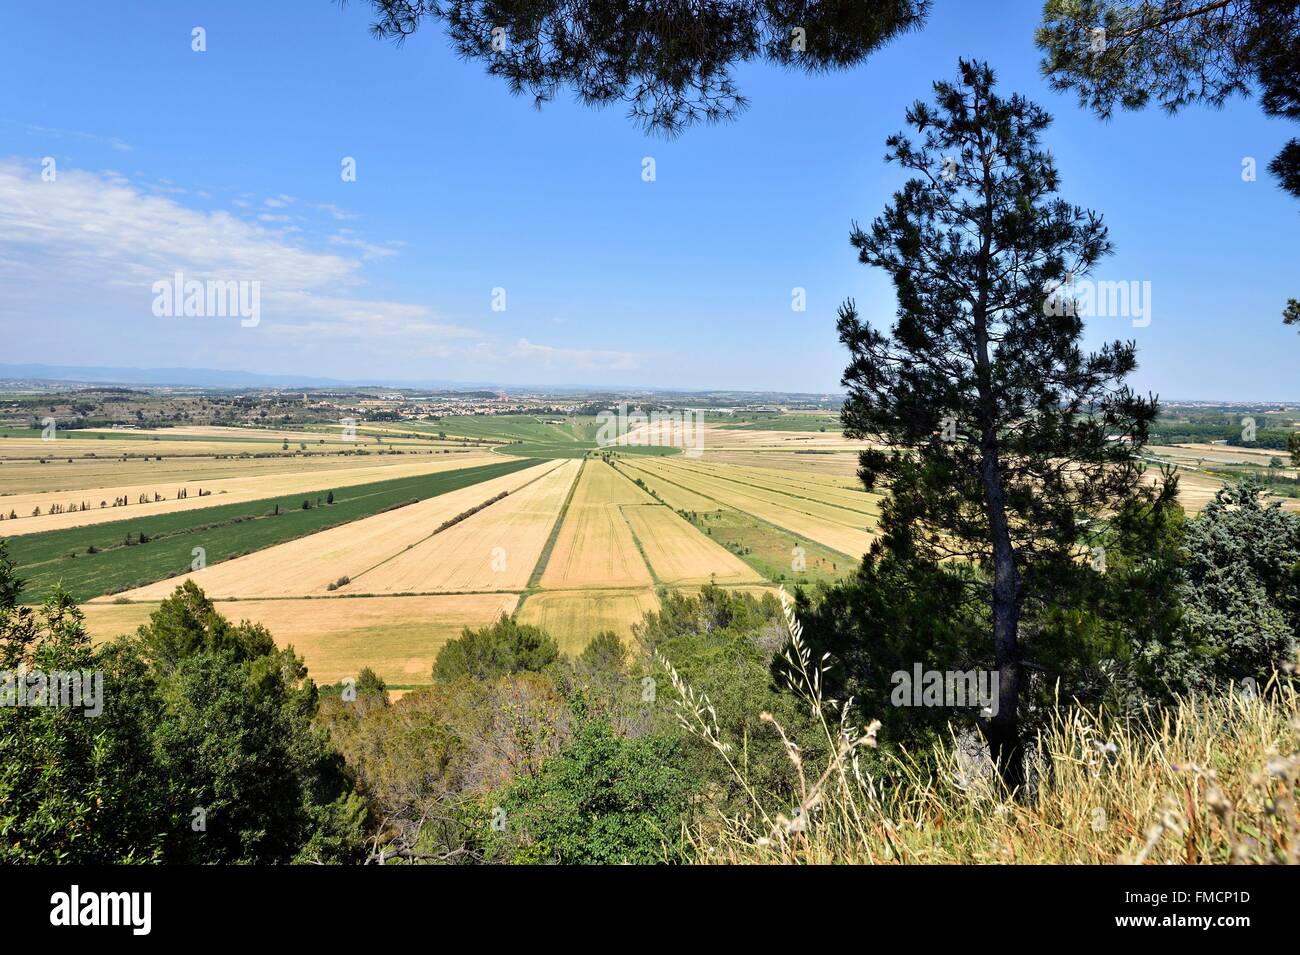 France, Herault, The pond of Montady is a former pond dried up in the Middle Ages which is situated at the foot of the Oppidum Stock Photo